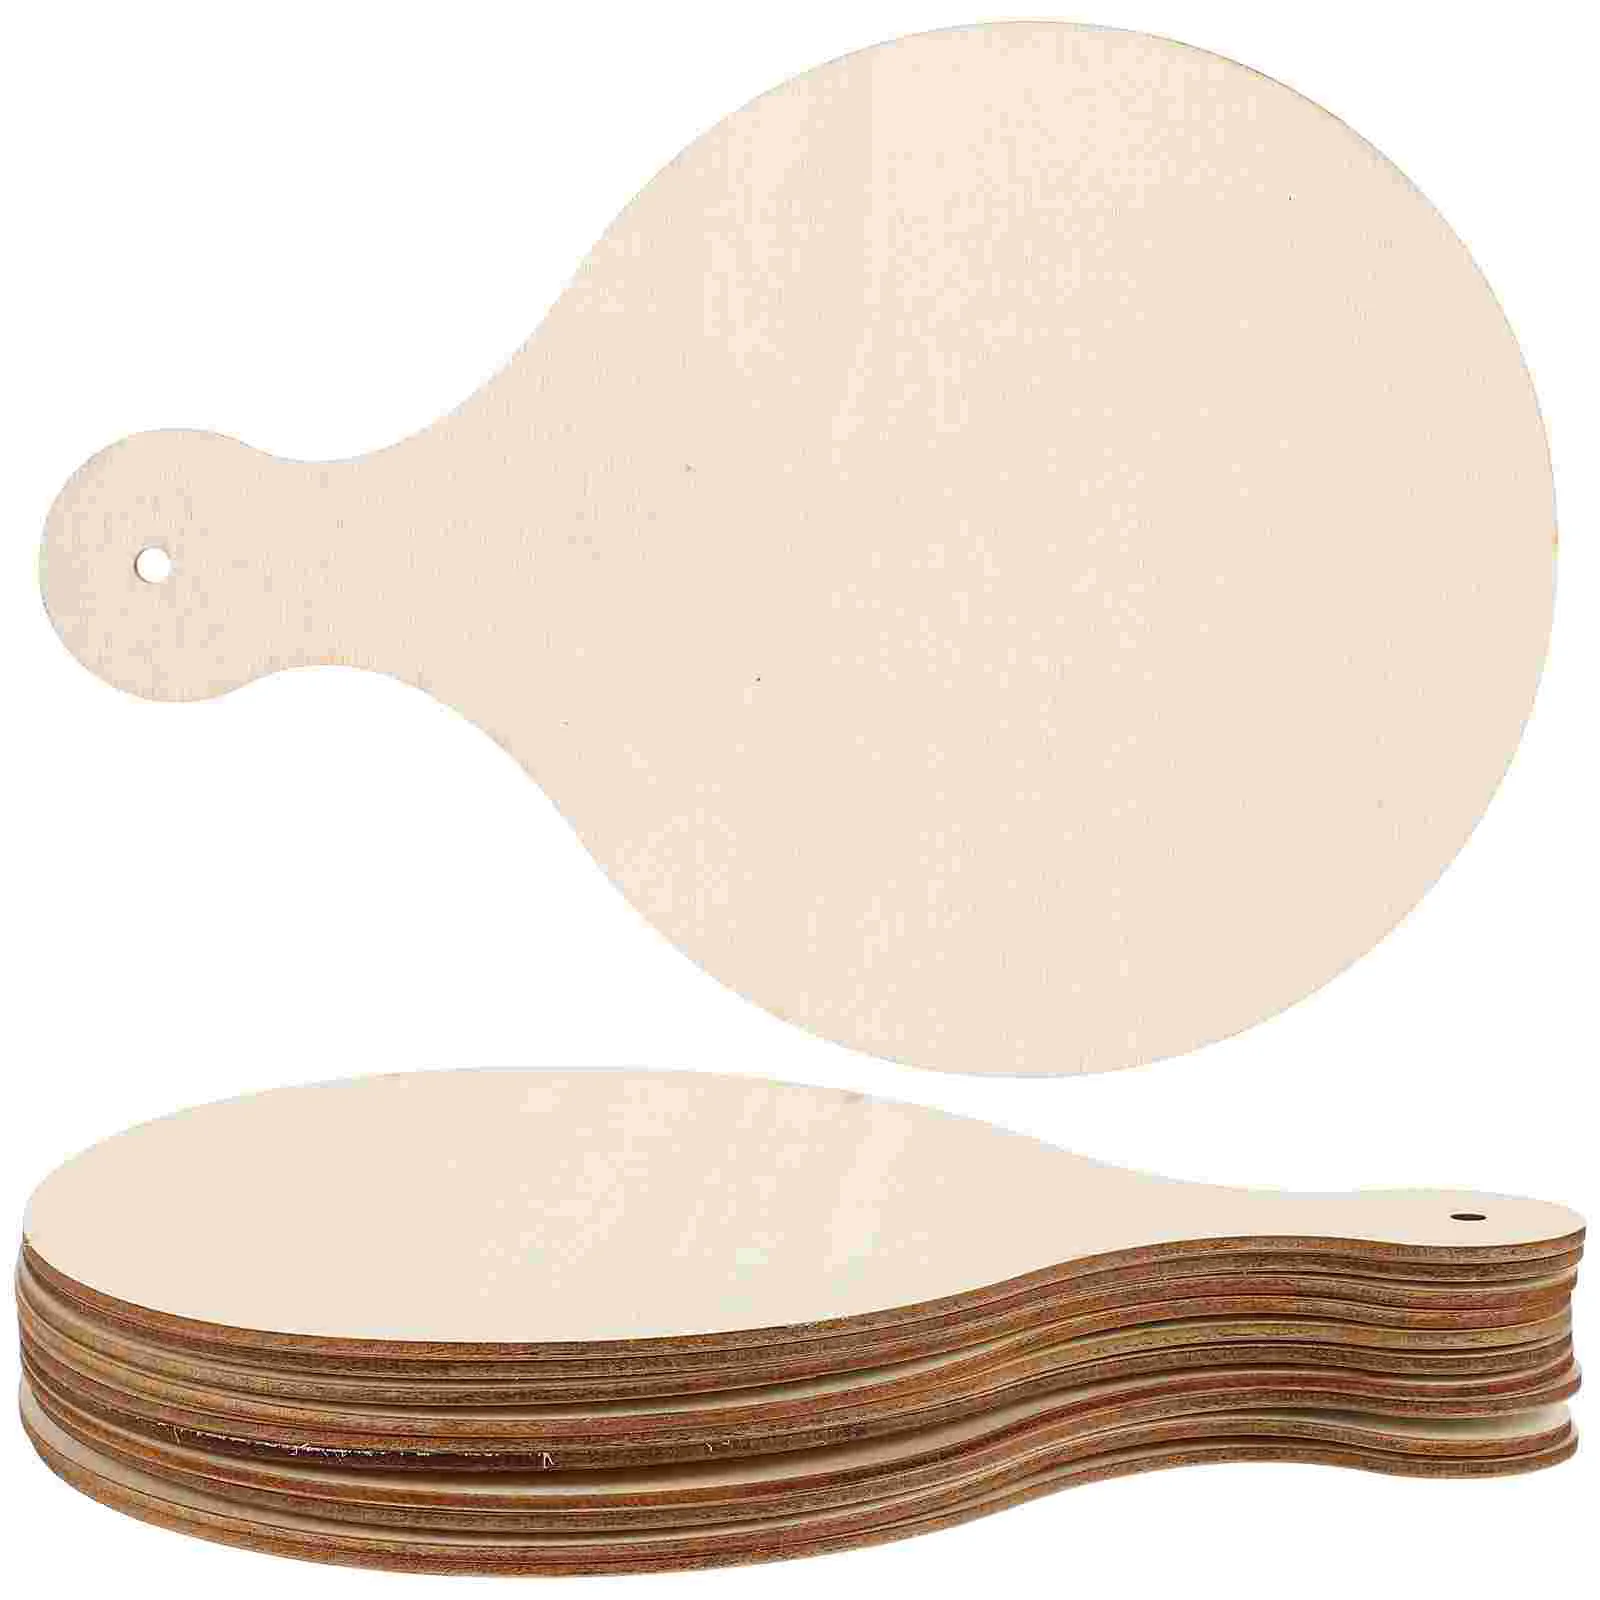 

Board Chopping Boards Tray Cutting Serving Wooden Meatwood Unfinished Round Butcher Cheese Block Cooking Paddle Peel Pizza Mini